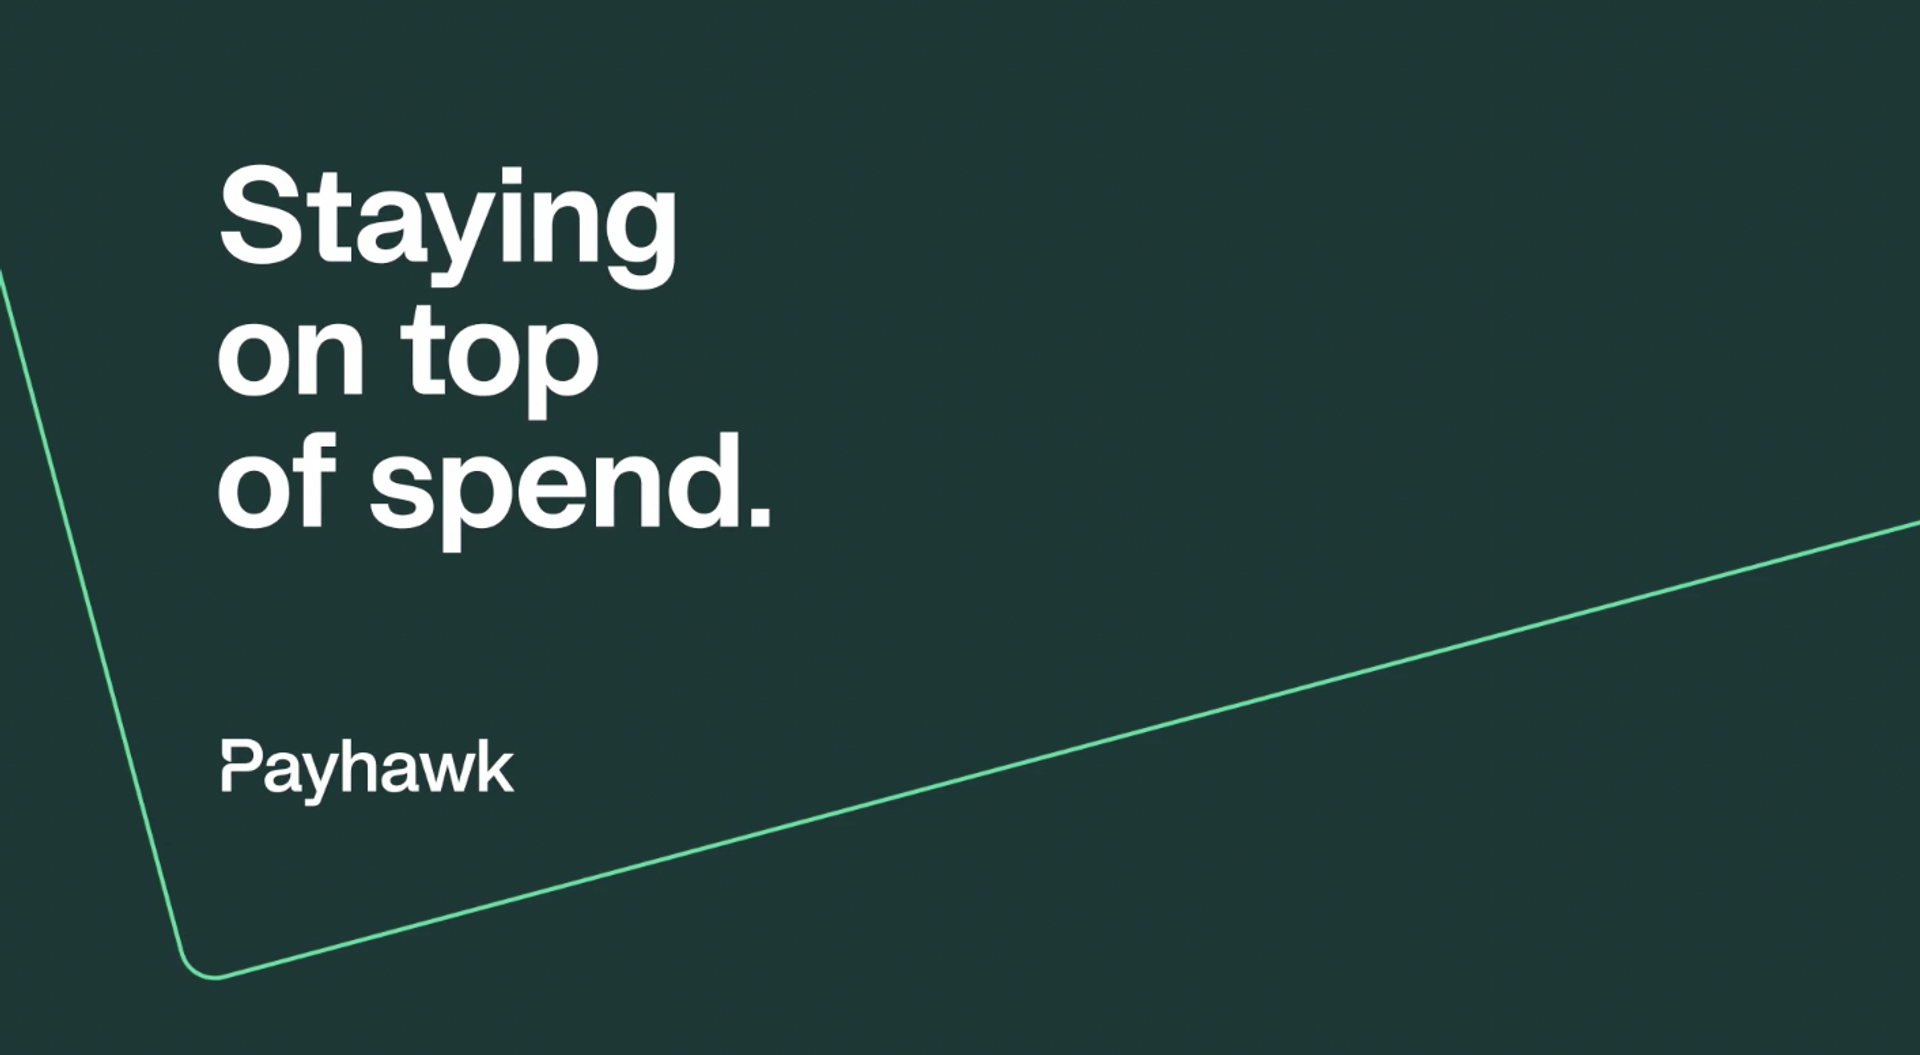 Video - staying on top of corporate spend control with Payhawk's cards. 